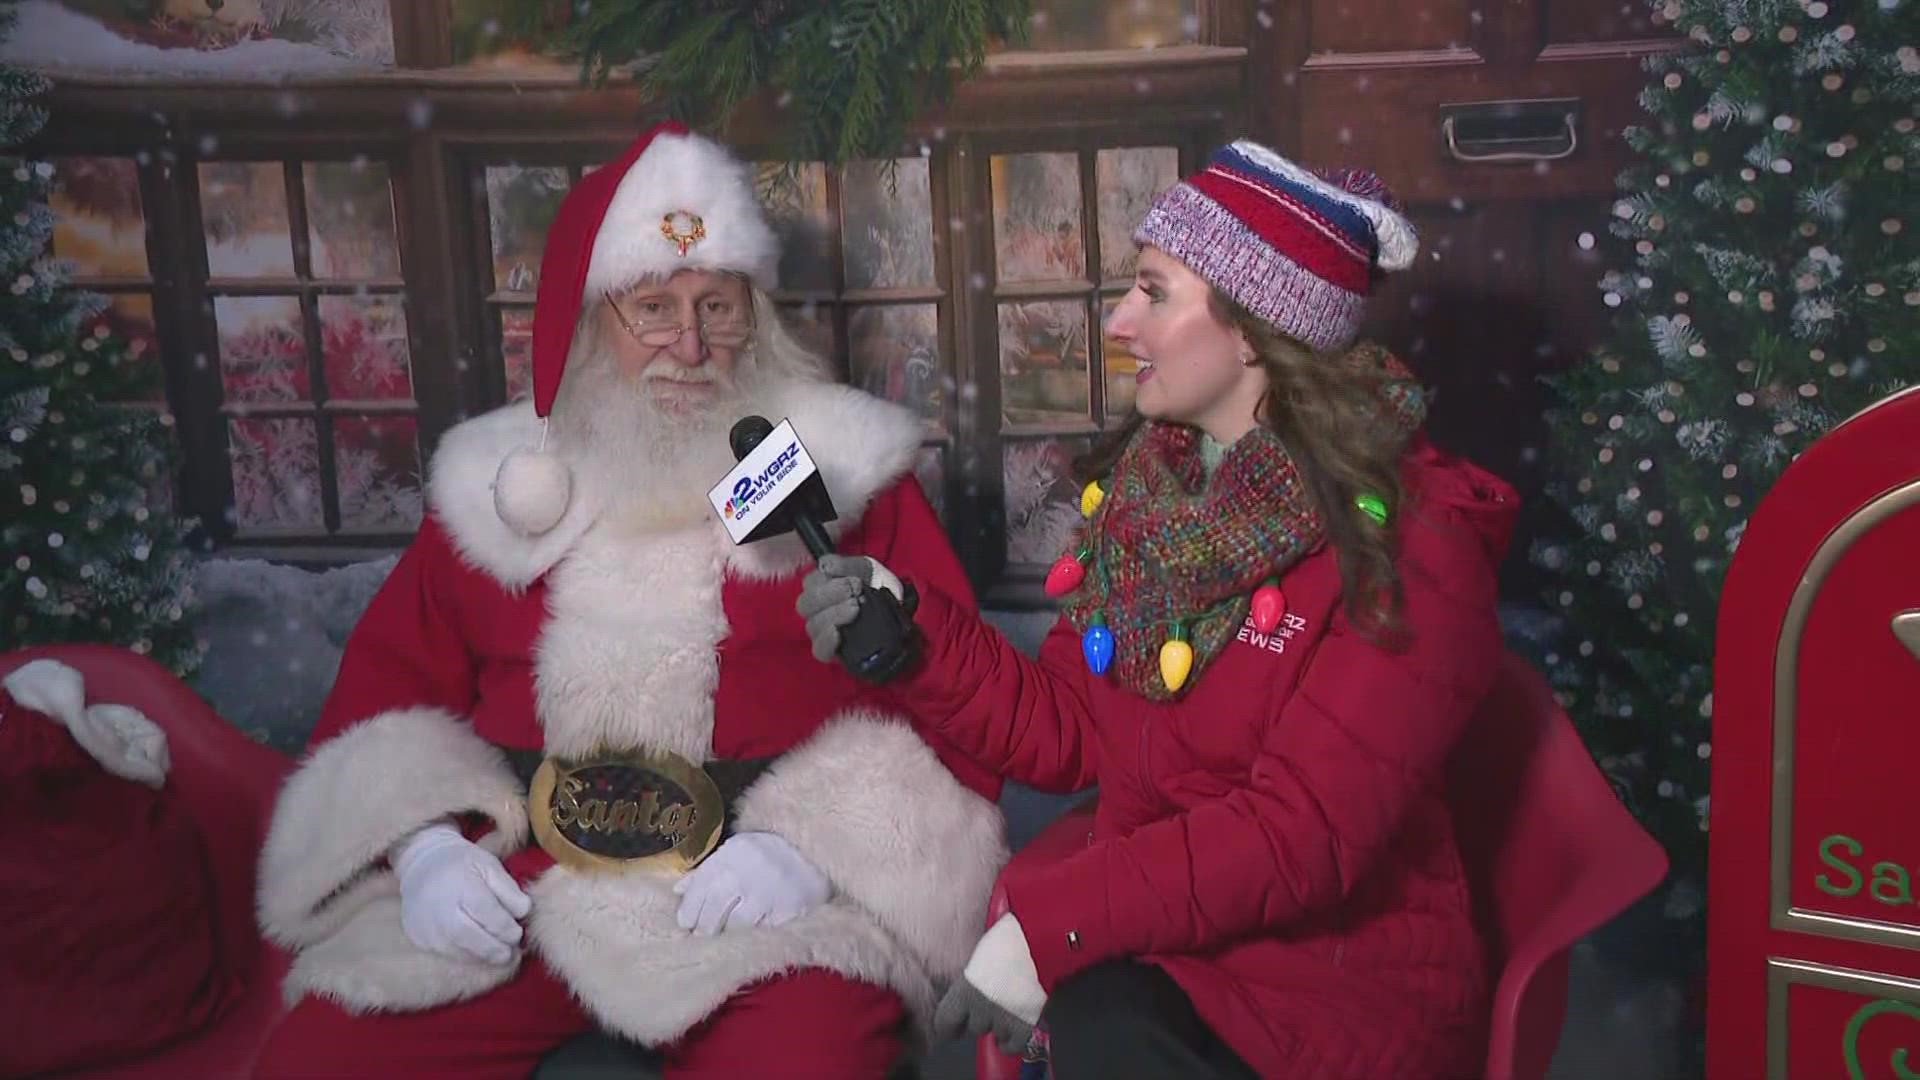 Meteorologist Elyse Smith Interviews Santa at the Roswell Park Tree of Hope Lighting